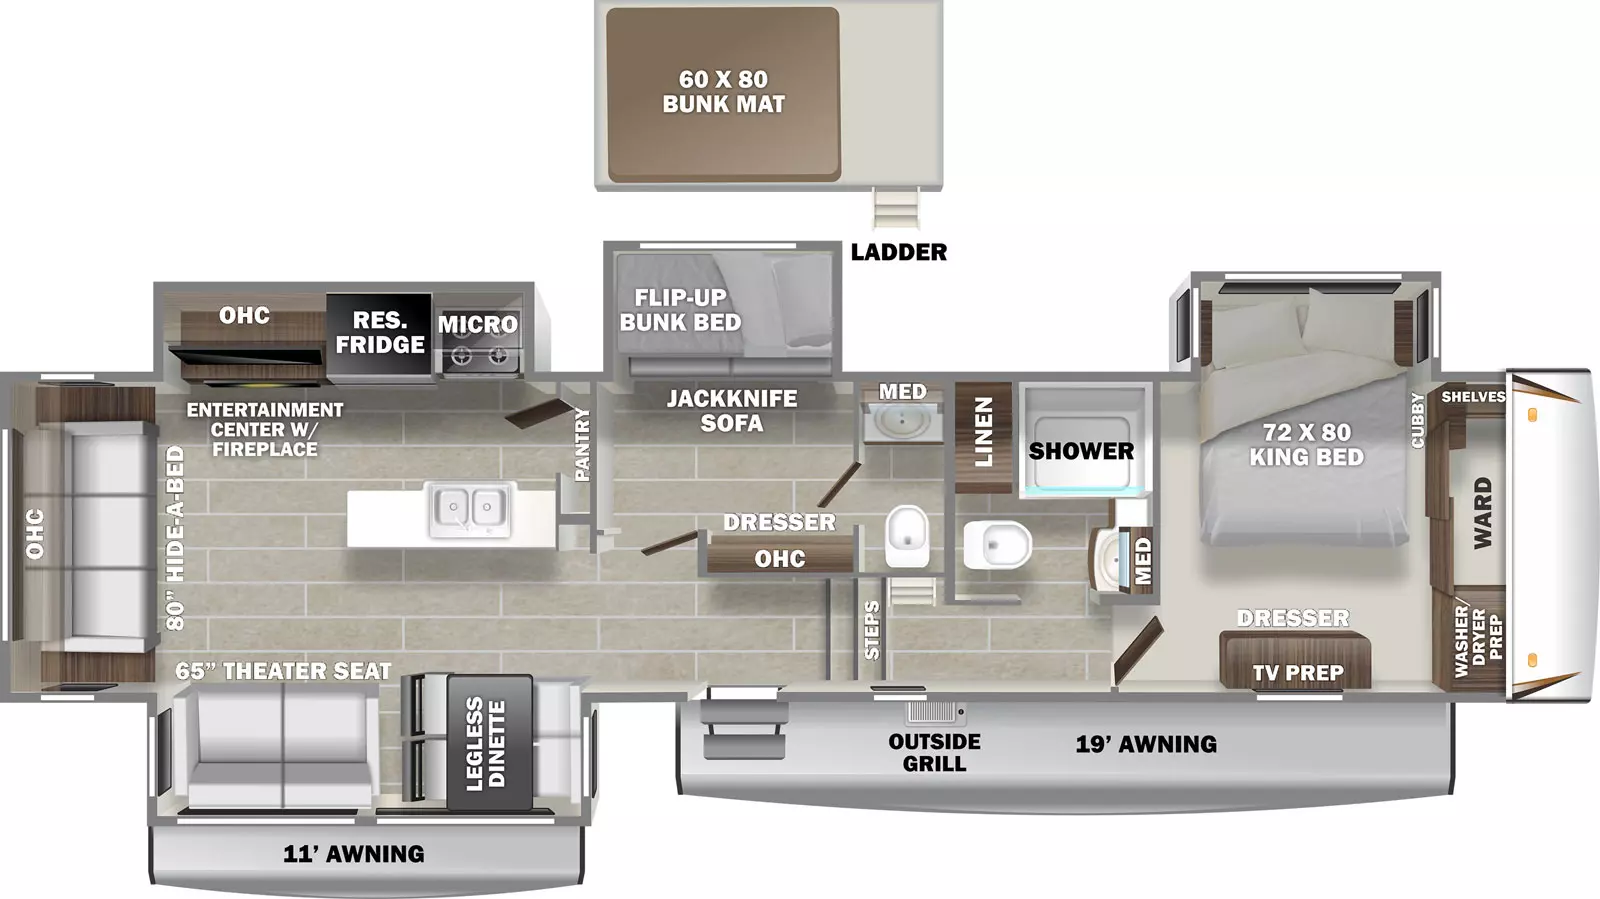 The Sanibel 3902WB floorplan has one entry door, four slideouts, and two electric power awnings. The rear awning is 11 feet. The front awning is 19 feet. There is also an outside grill on the door side, to the right of the entry door. The Entry door leads to a hallway with steps on the right, on the left it leads to a living room. Through the entry door and slightly to the left is a door leading to a bunk room. The bunk room has a slideout with a flip up bunk bed and a jackknife sofa. The front of the room has a door leading to a bathroom. The bathroom has a toilet and a sink with a medicine cabinet above. Back in the bunk room, the door side has a dresser with overhead storage above and a door leading back to the entry hallway. In the rear area of the RV, to the left of the entry door is a living area. The door side slideout has a table with two chairs and a booth. Also in the slideout is a hide-a-bed sofa. The rear of the RV is a sofa with theater style seating, end tables on either side, and overhead storage above. The off door slide out has a an entertainment center with an electric fireplace below and overhead storage above. It also has a refrigerator and a stove with a microwave above. The front end of the kitchen area has a pantry. A counter top with a sink runs perpendicular from the kitchen area front wall. Back at the entry door to the right is a hallway. On the left is a ladder leading to a loft with a bunk matt. Further down the hallway to the left is a door leadi